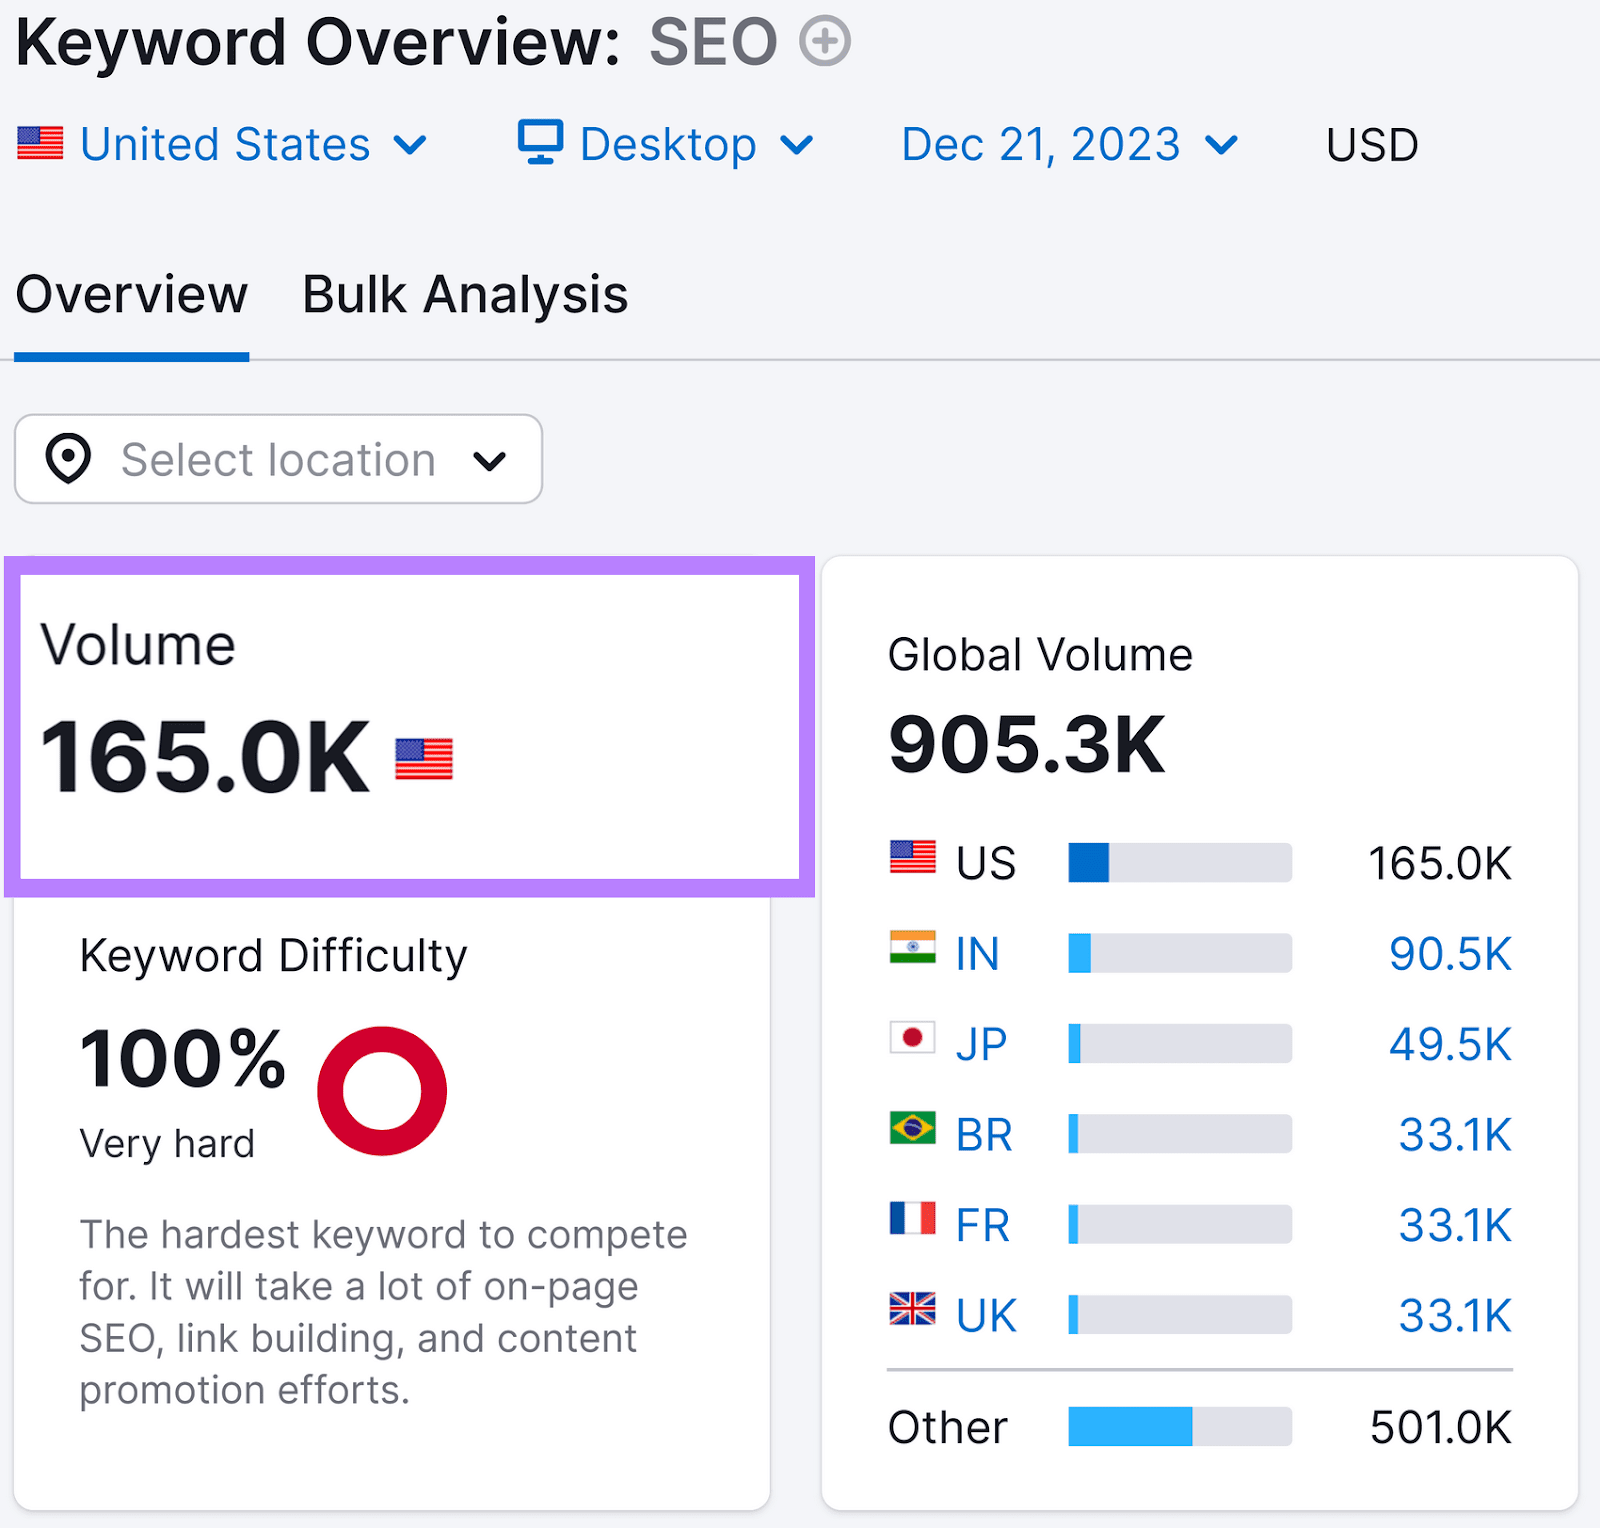 “SEO” is a high-volume keyword, with 165K monthly searches in US (as shown in Keyword Overview tool)